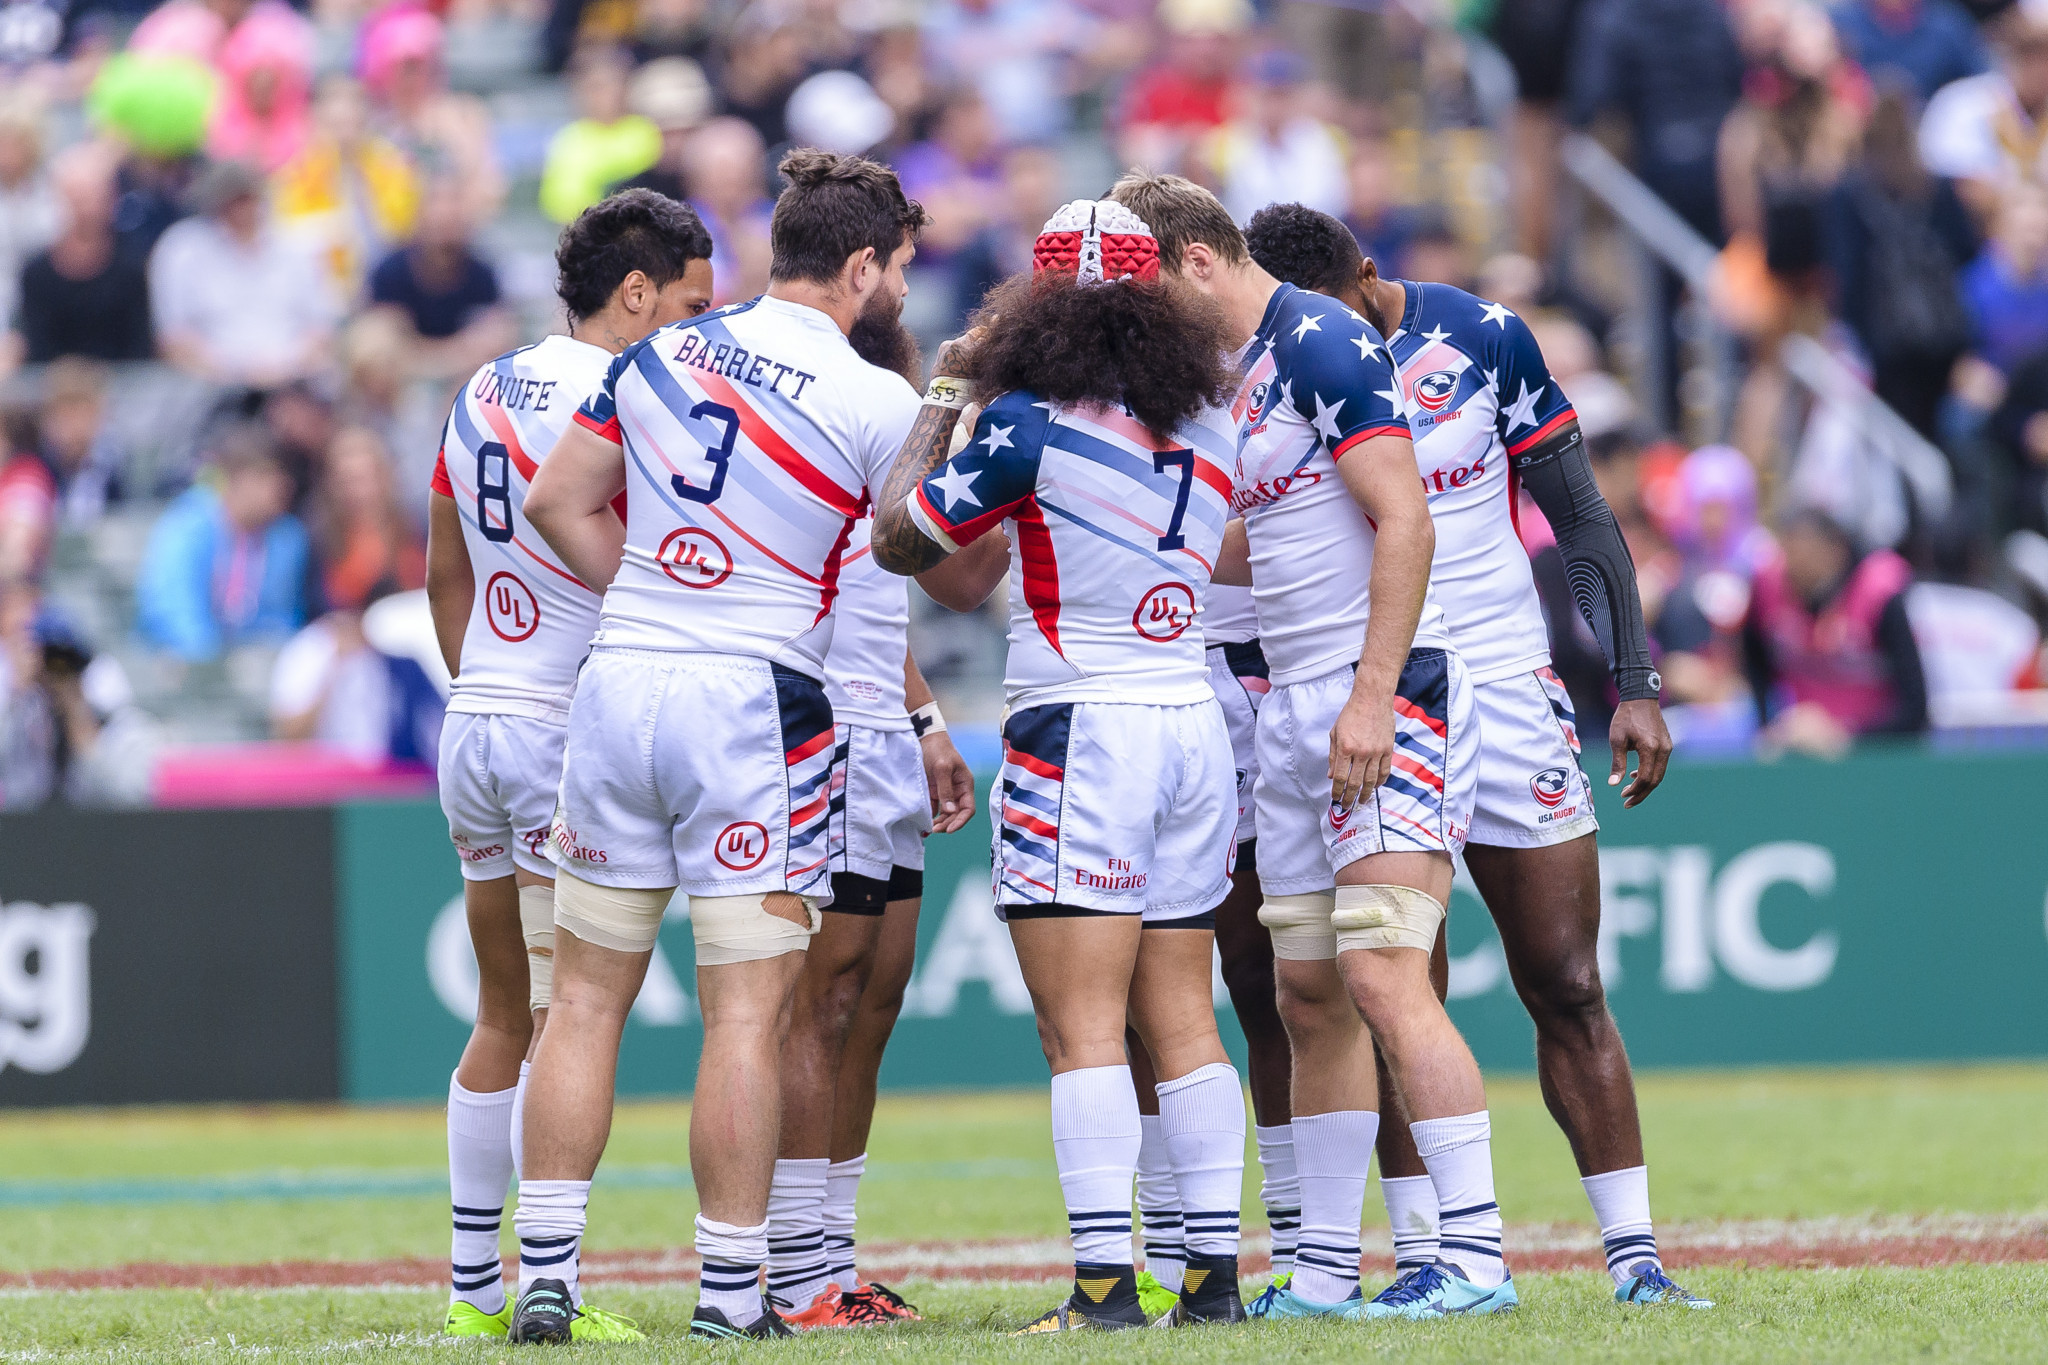 USA Rugby proposes new governance model after filing for bankruptcy